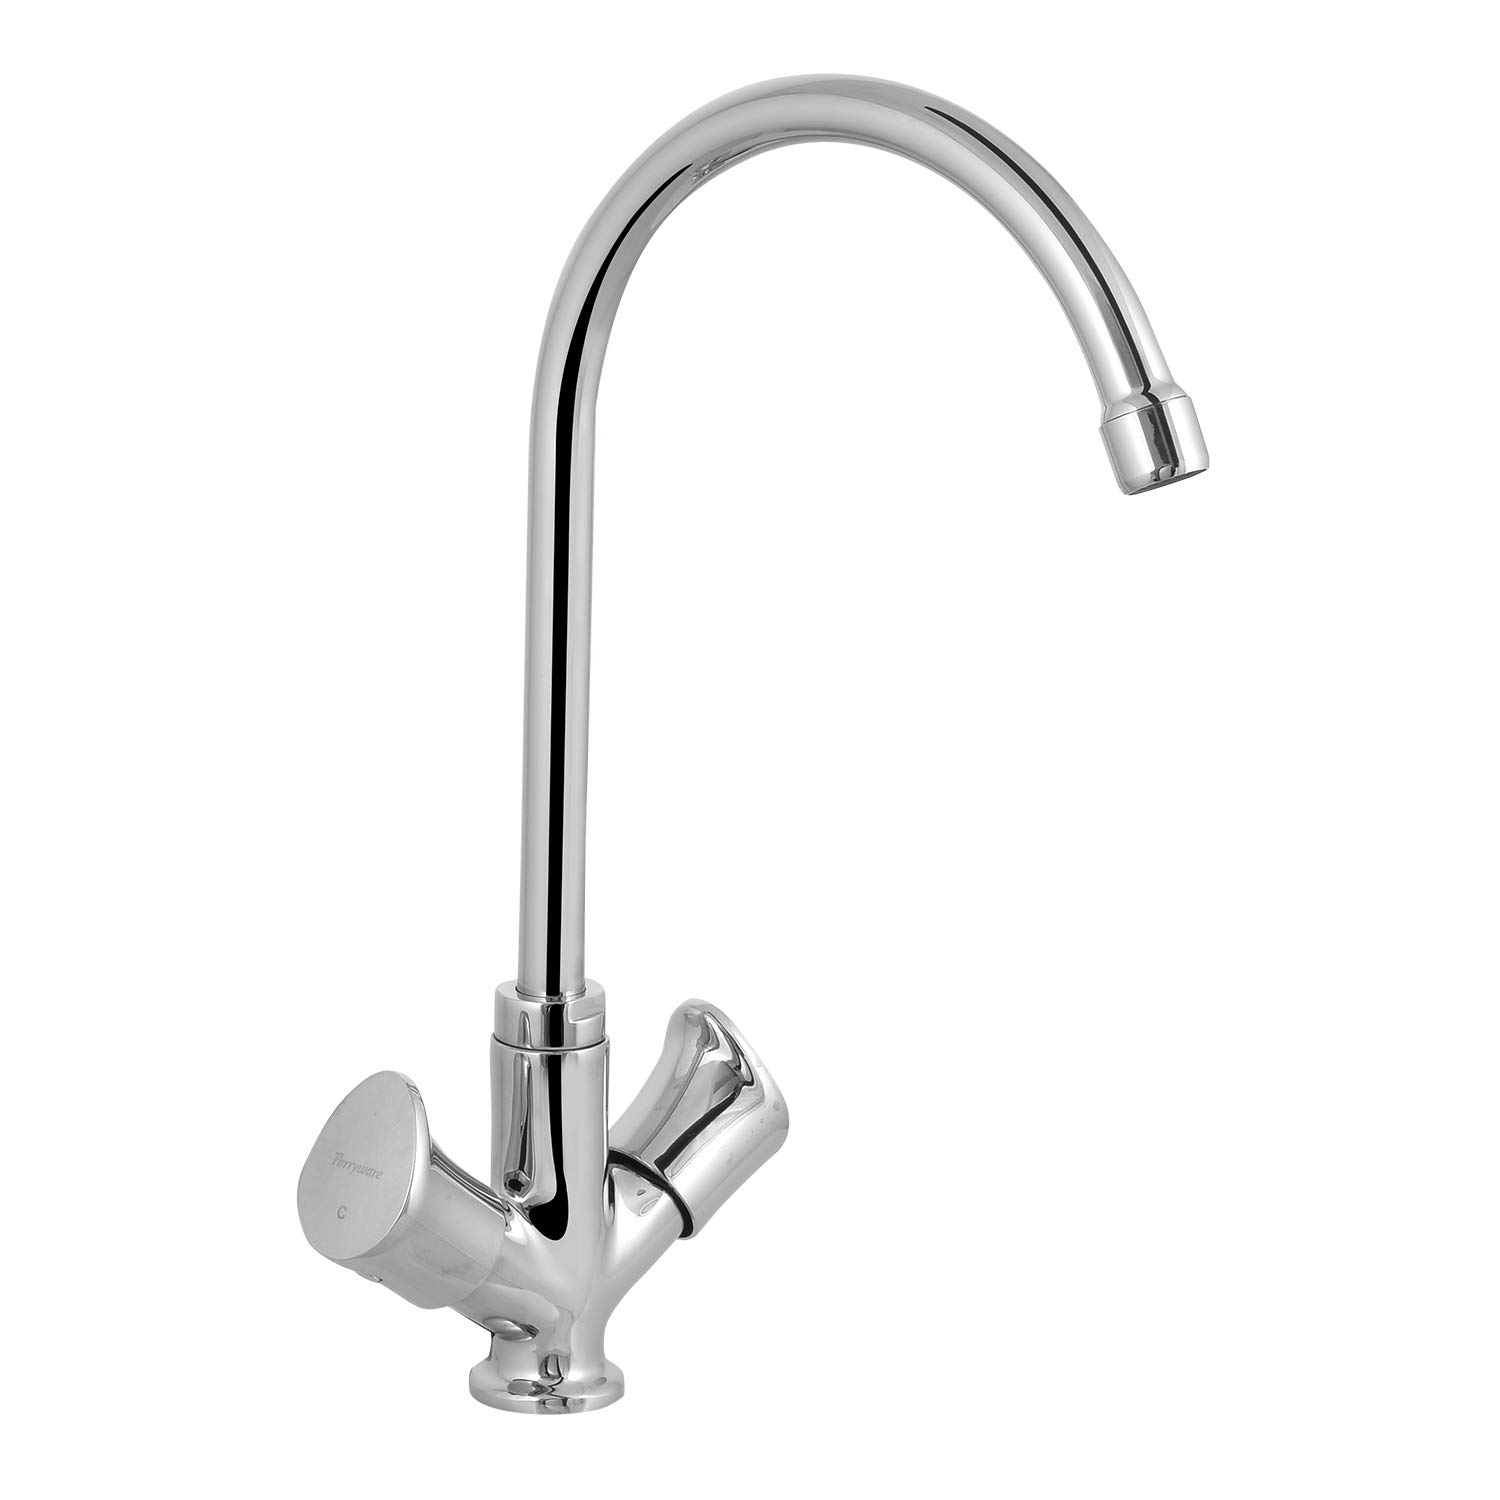 Parryware Droplet Deck Mounted Sink Mixer G4750A1 (Quarter Turn Range with Ceramic Innerhead)